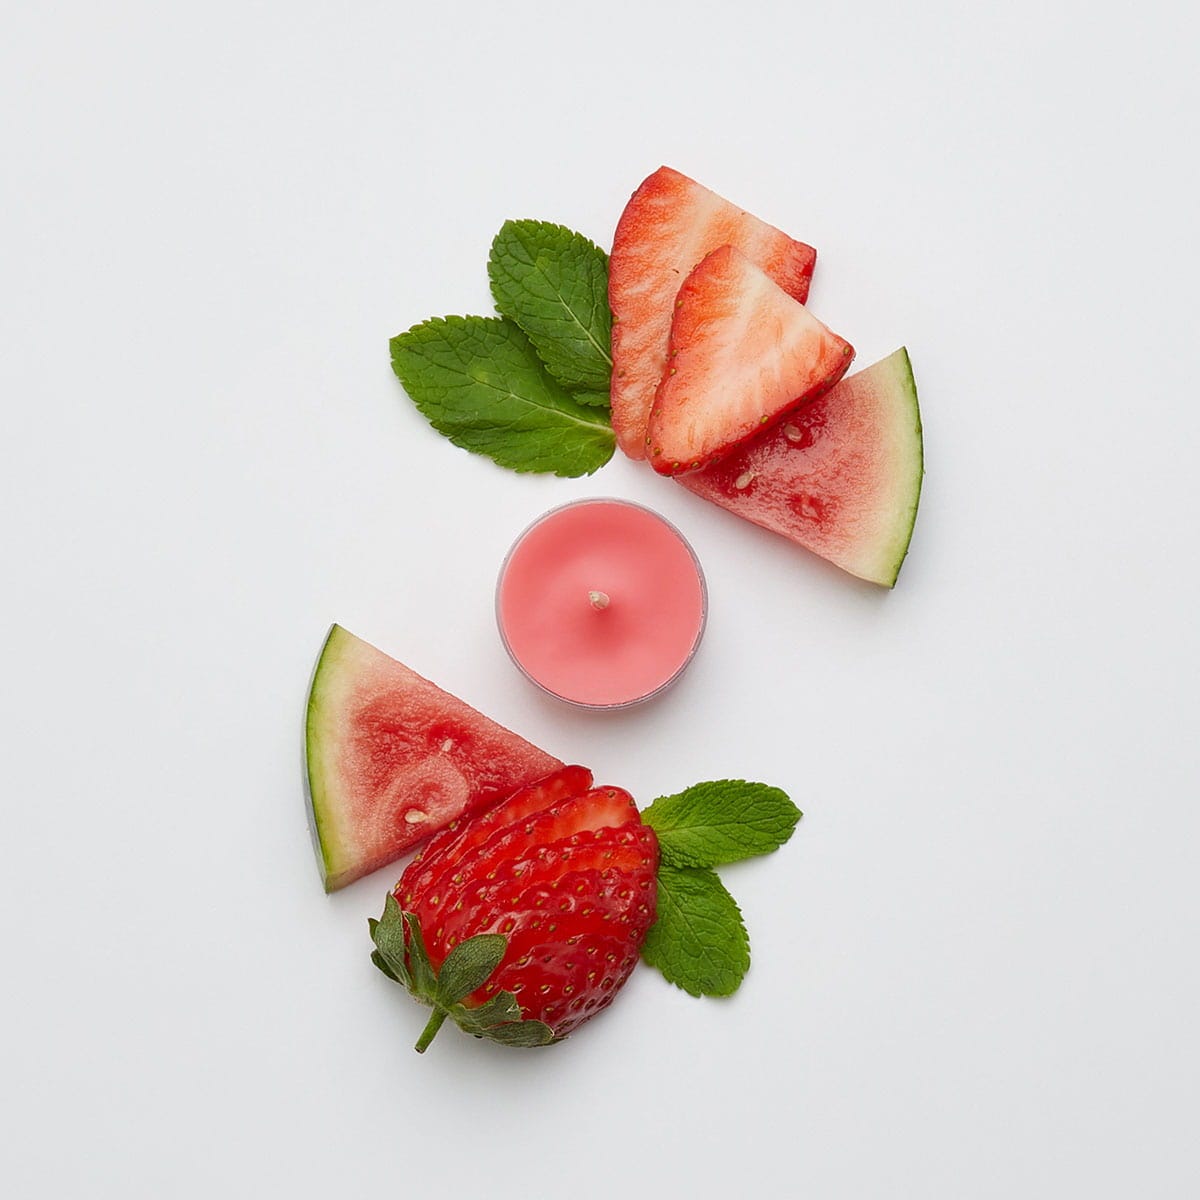 Strawberry Fields Universal Tealight® Candles - PartyLite US